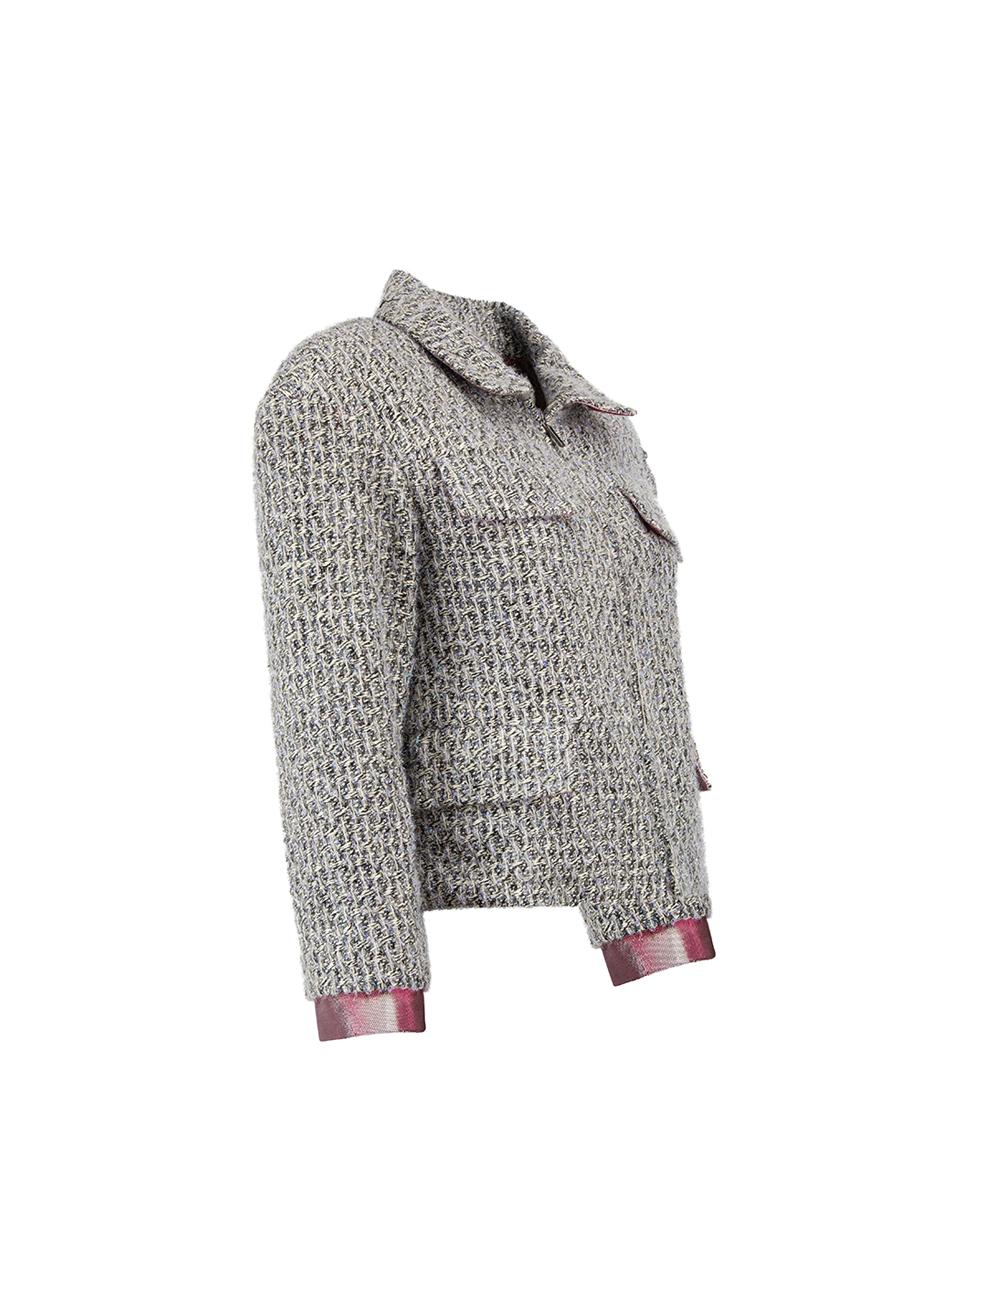 CONDITION is Very good. Minimal wear to coat is evident. Pilling to outer material, a couple of loose thread to external material and to the lining on this used Chanel designer resale item.   Details  Runway Piece Blue Tweed Fitted blazer Front zip